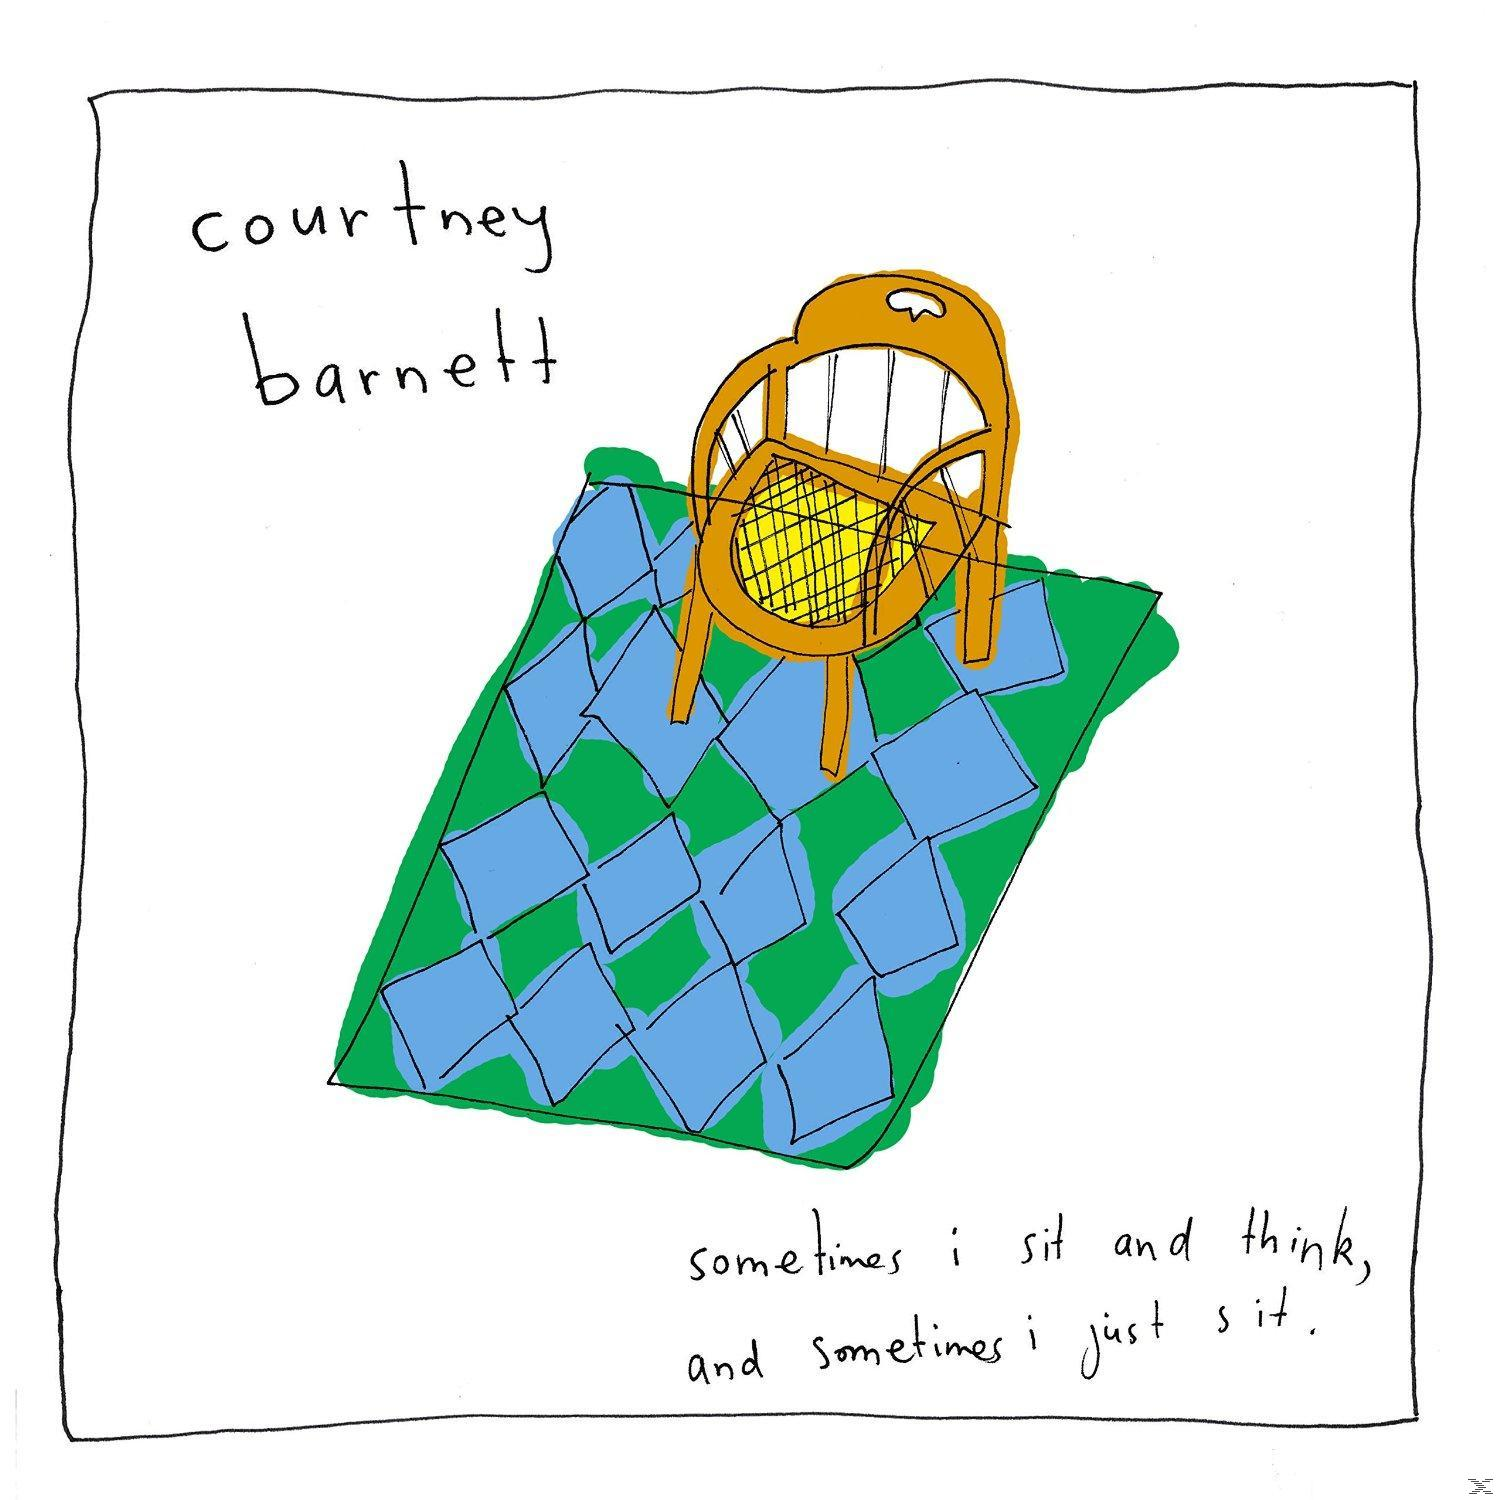 Courtney Sometimes And Sit - - I And Sometimes...(Lp+Mp3) Barnett (Vinyl) Think,